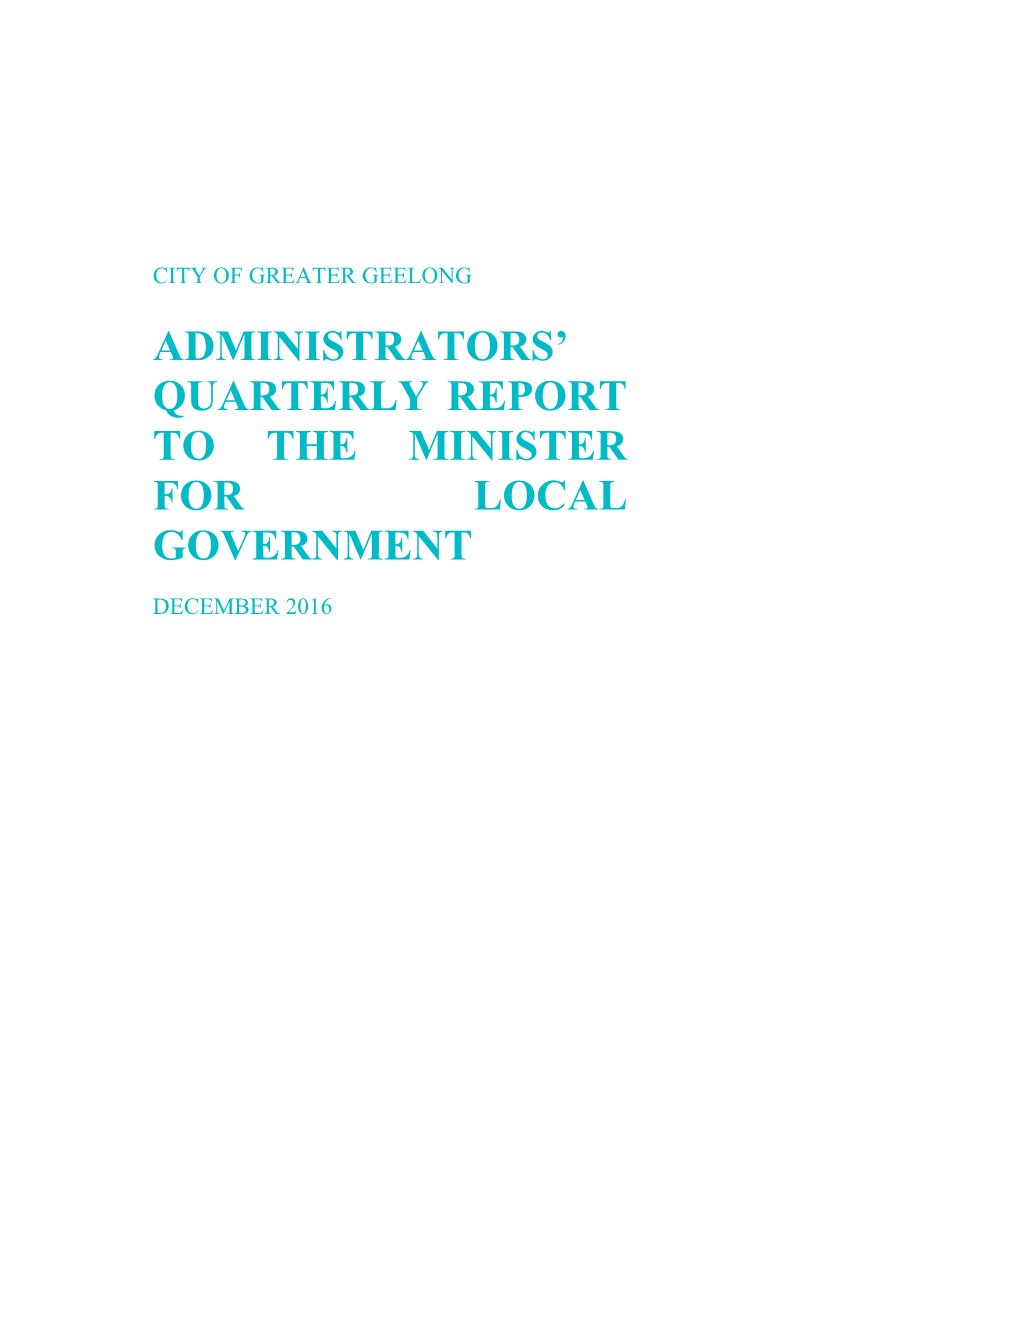 Administrators Quarterly Report to the Minister for Local Government